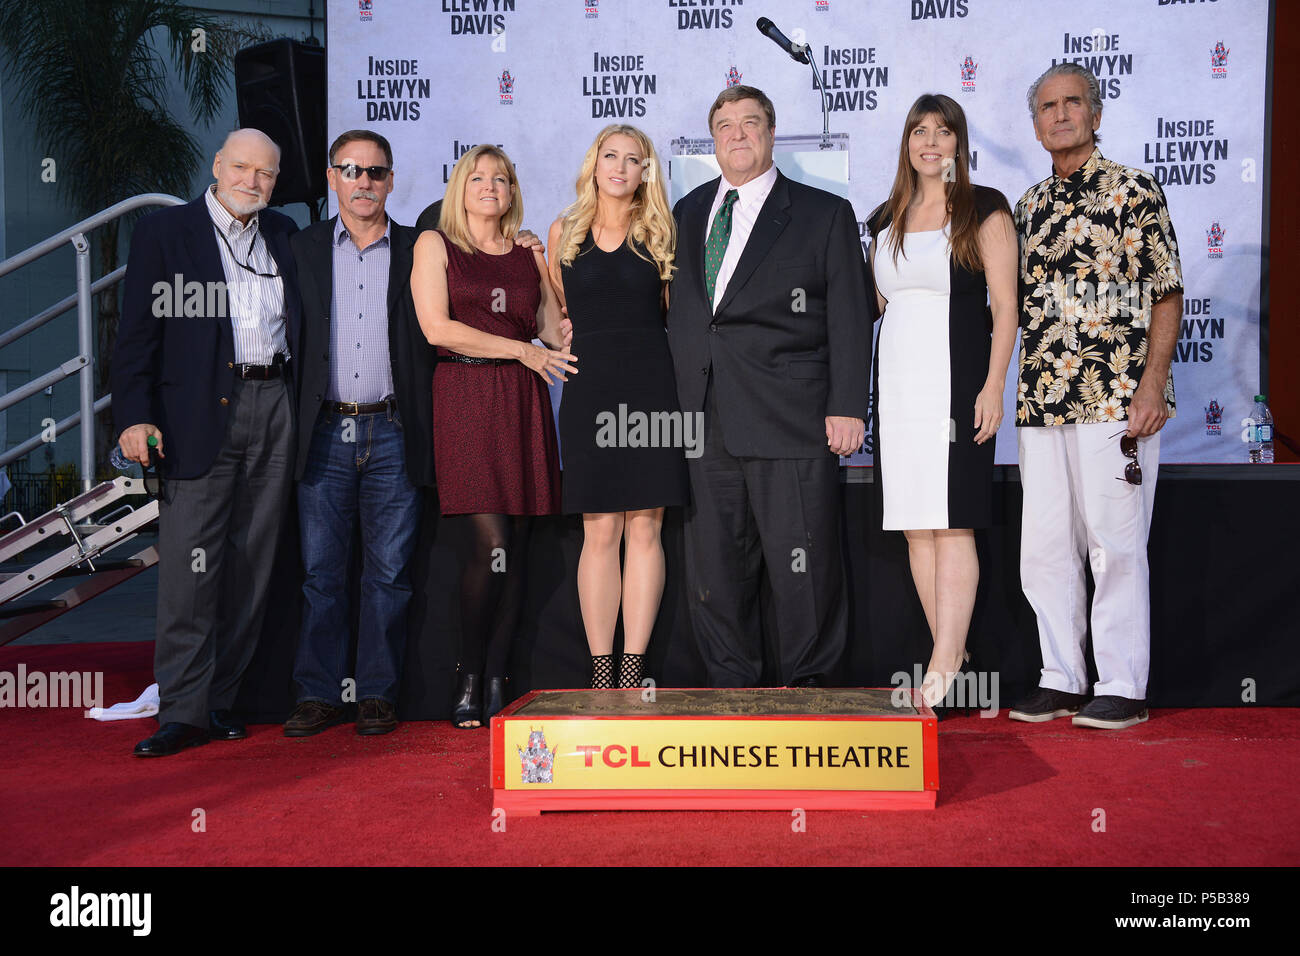 John Goodman, Wife Anna Beth Goodman  & Daughter Molly & Family  at the ceremony honoring John Goodman  with hand and foot print at the TCL Chinese Theatre in Los Angeles.John Goodman, Wife Anna Beth Goodman  & Daughter Molly & Family 014 ------------- Red Carpet Event, Vertical, USA, Film Industry, Celebrities,  Photography, Bestof, Arts Culture and Entertainment, Topix Celebrities fashion /  Vertical, Best of, Event in Hollywood Life - California,  Red Carpet and backstage, USA, Film Industry, Celebrities,  movie celebrities, TV celebrities, Music celebrities, Photography, Bestof, Arts Cultu Stock Photo